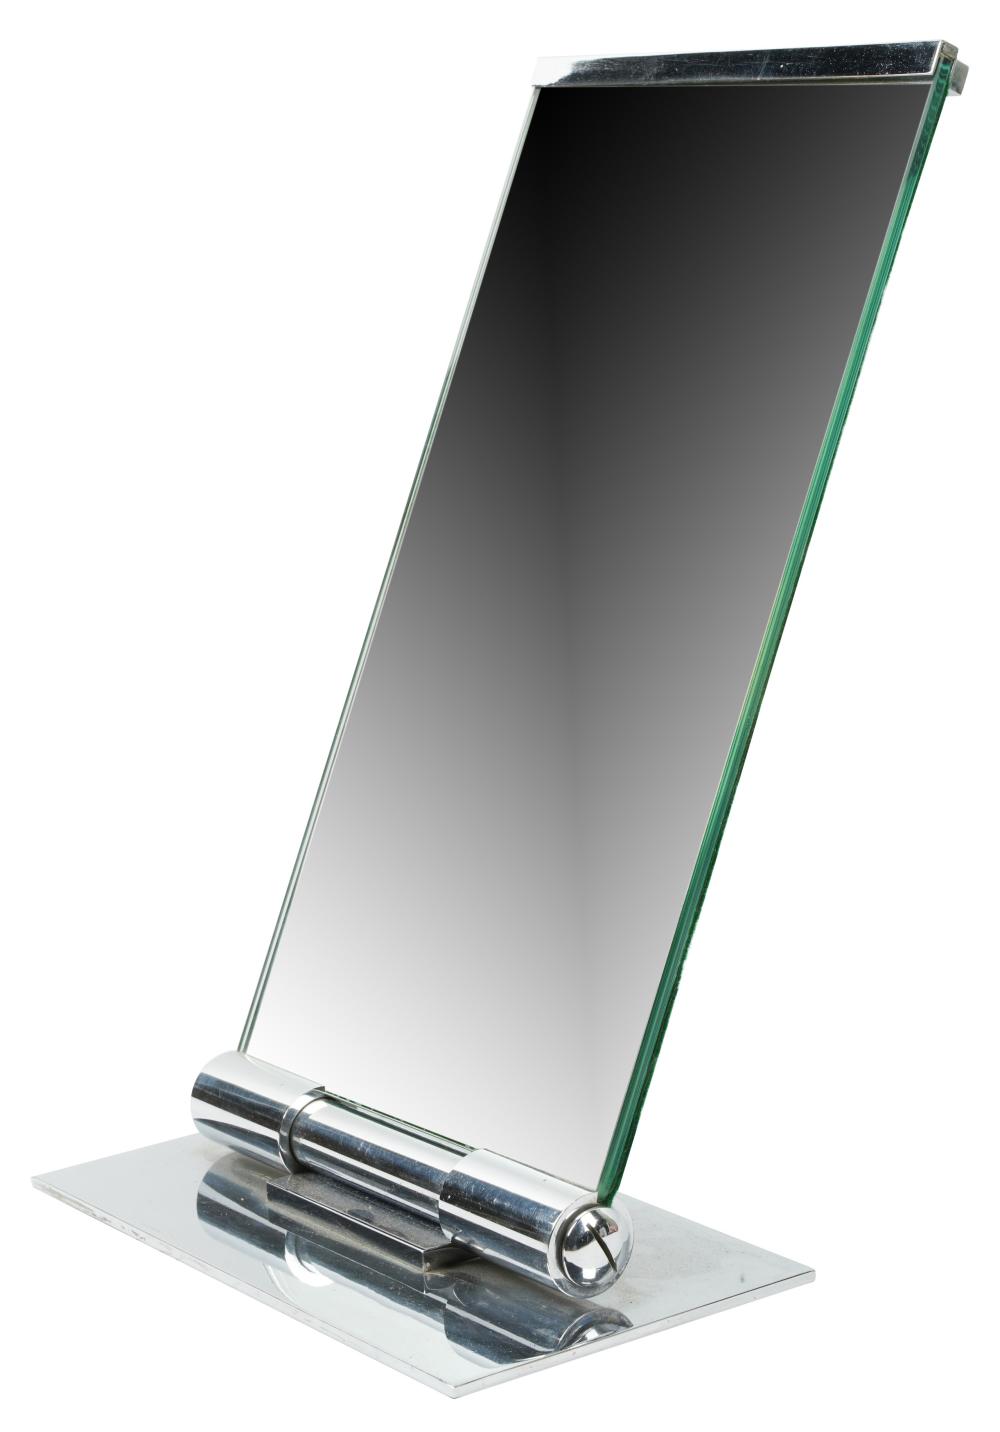 MODERNIST POLISHED STEEL AND GLASS 30400d